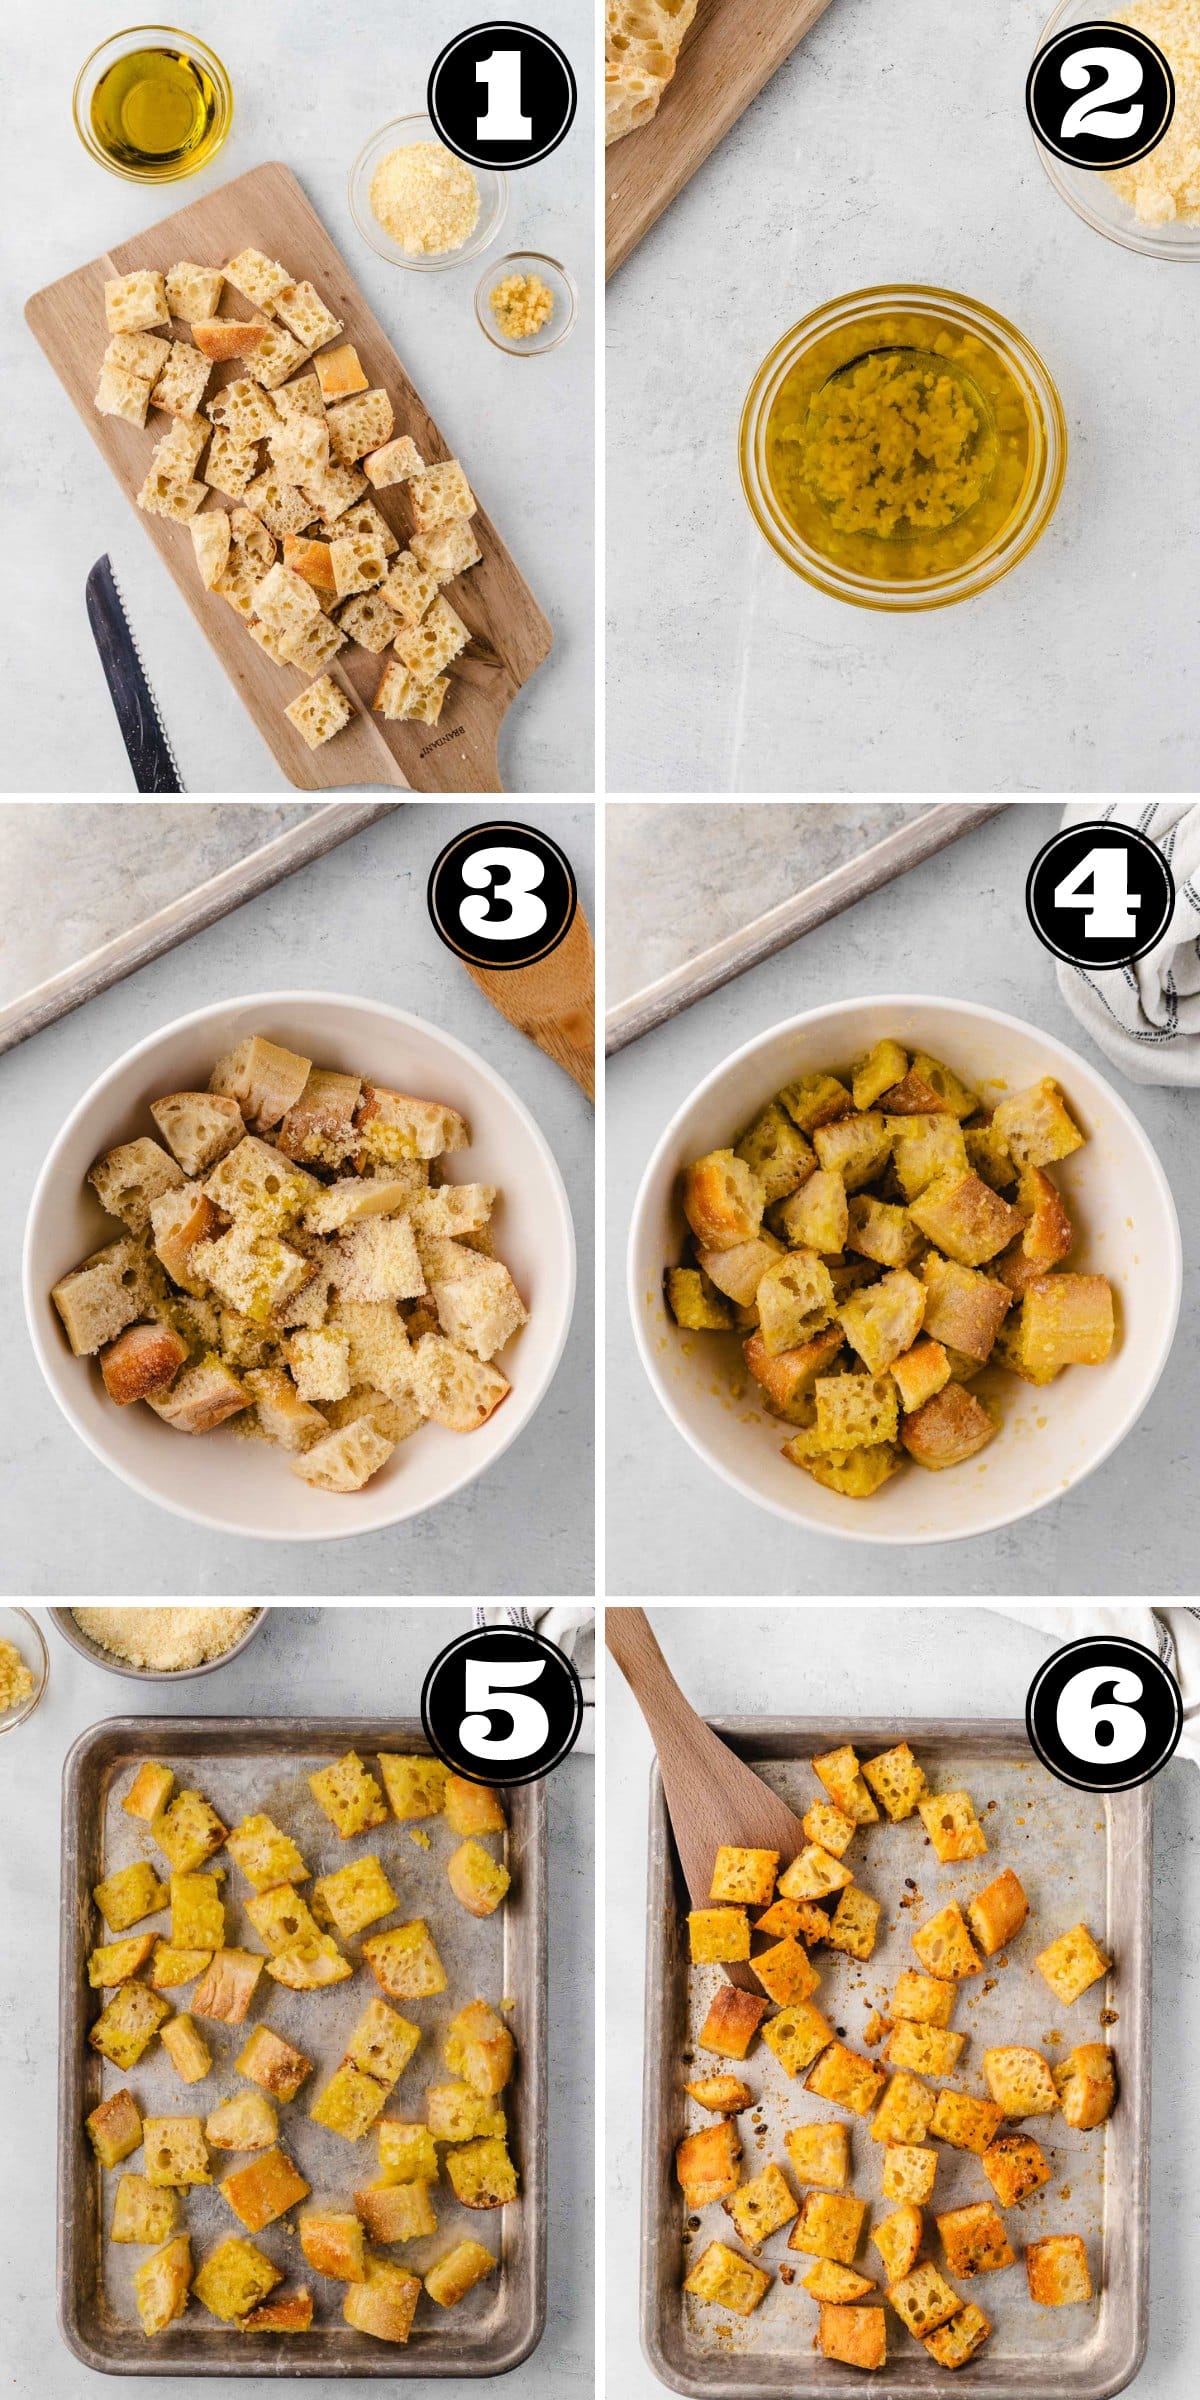 Collage image showing steps to bake croutons in the oven.